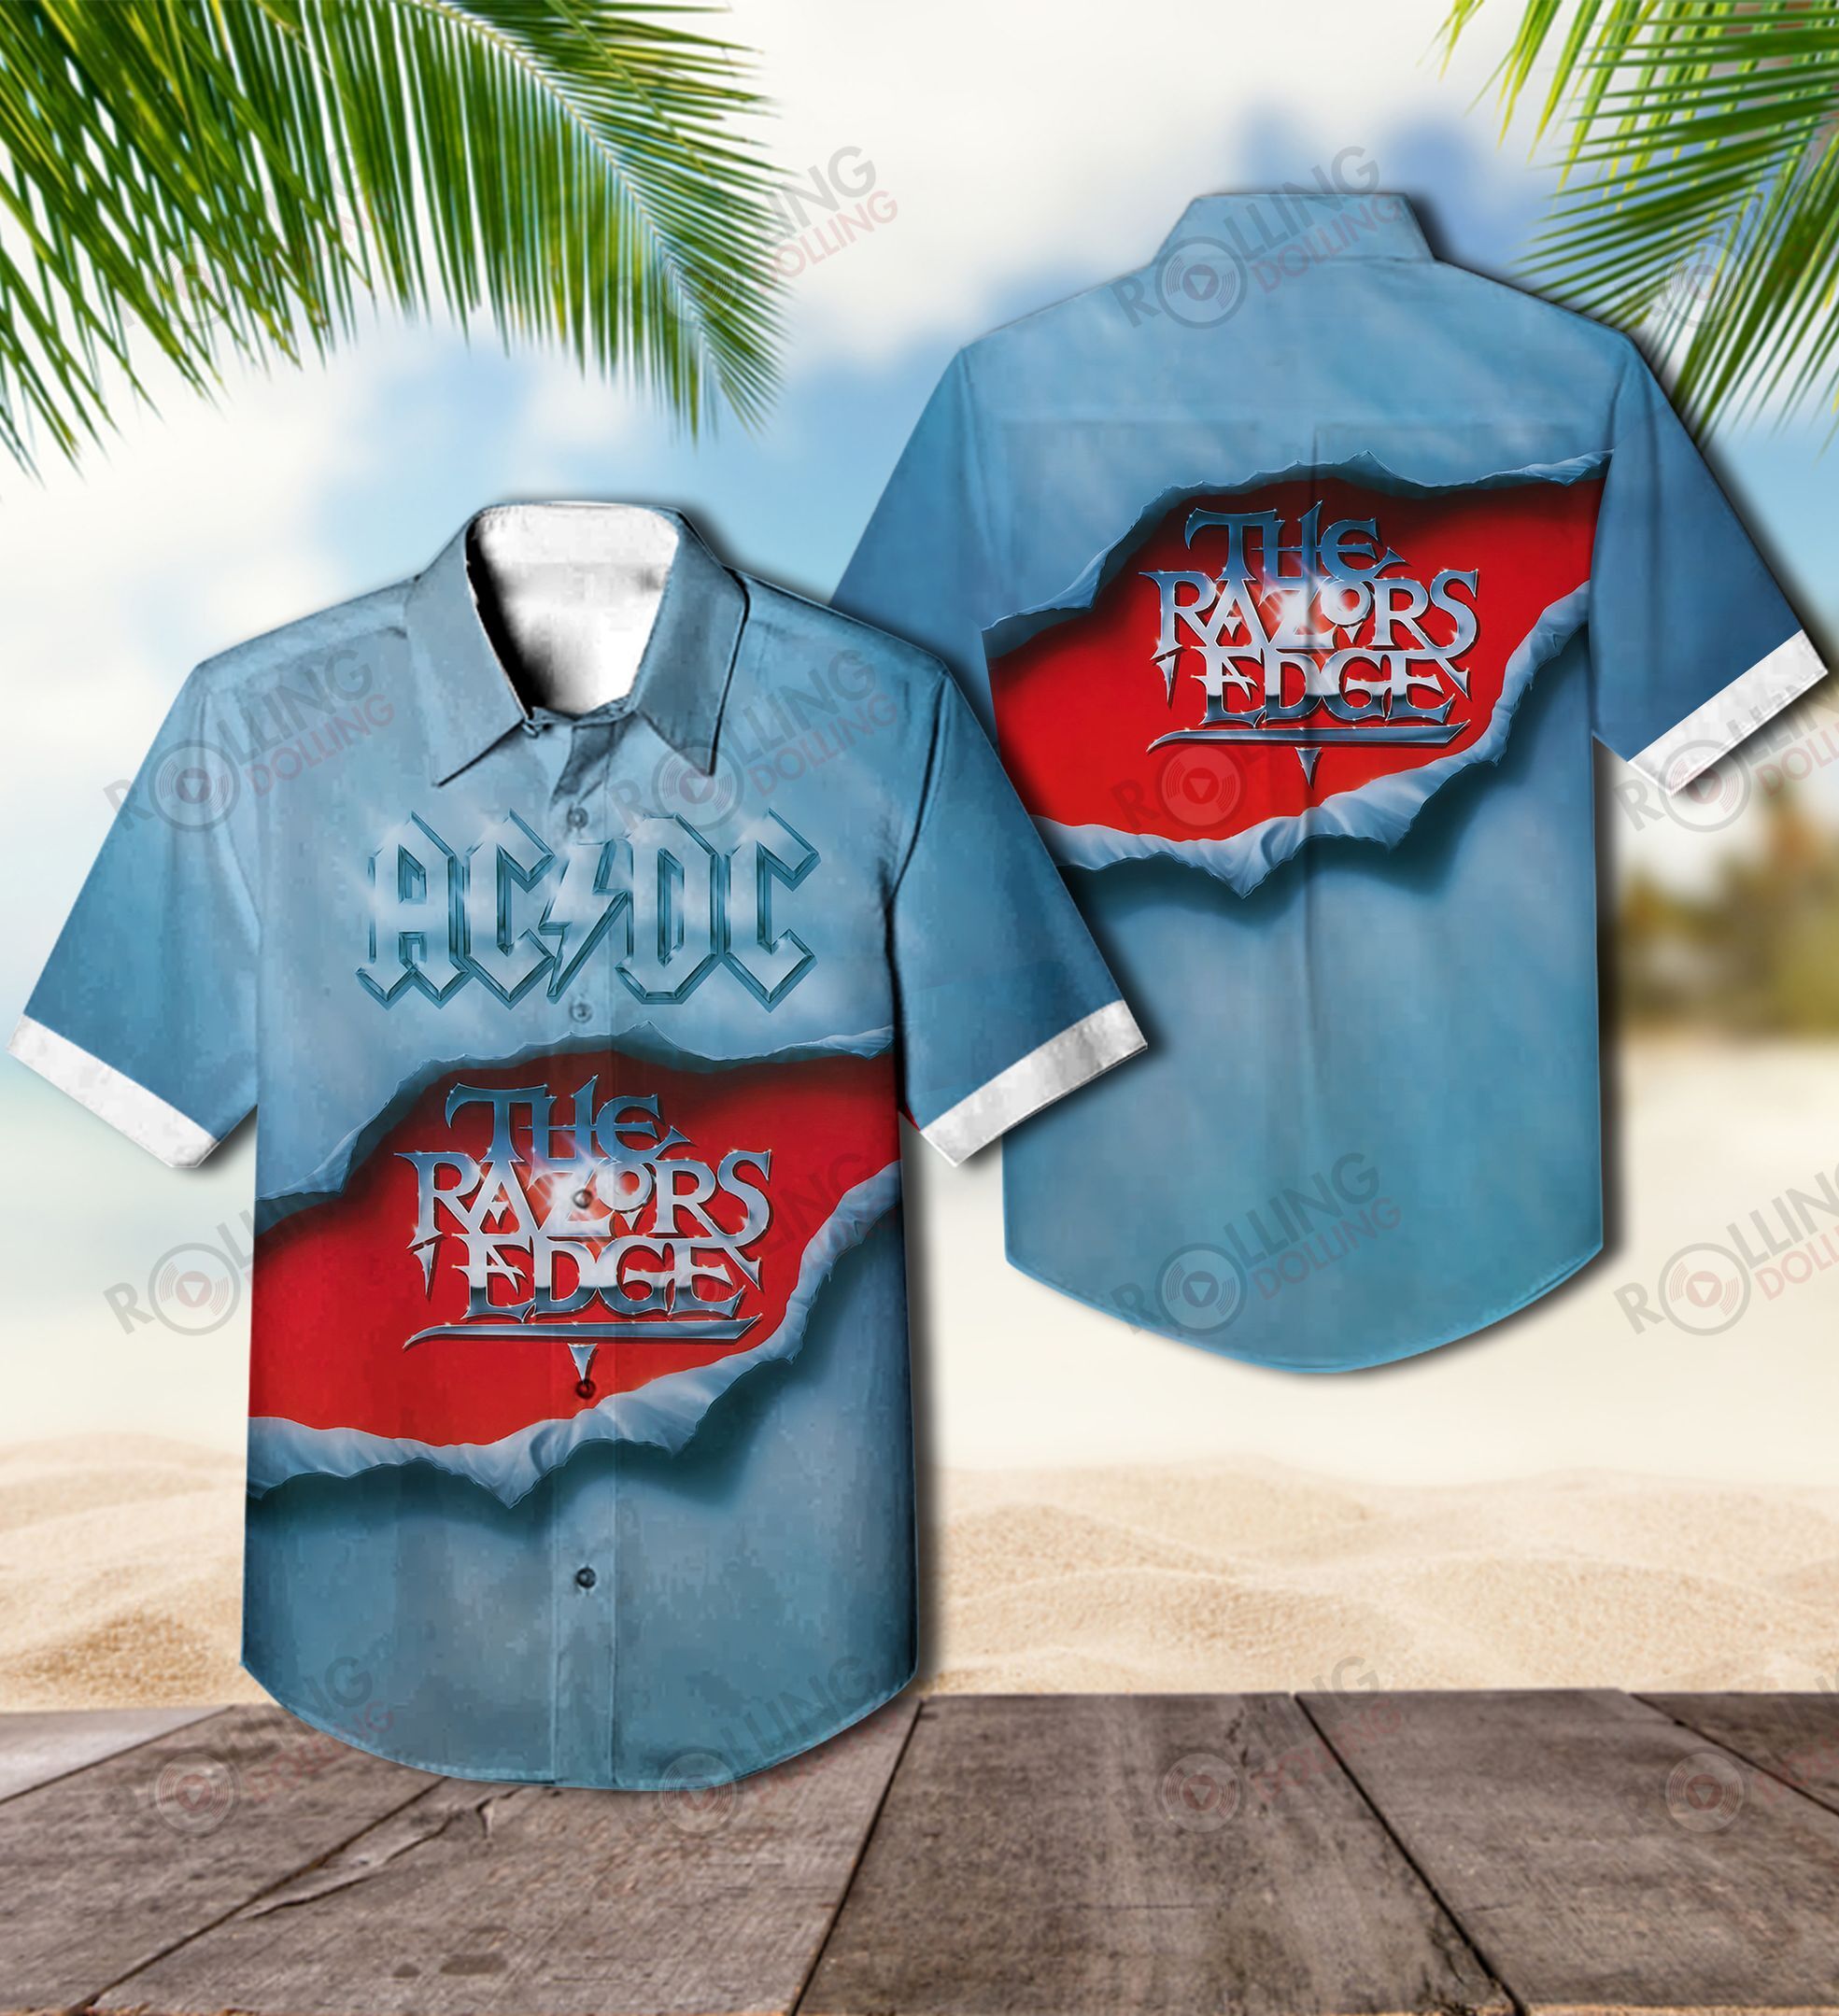 This would make a great gift for any fan who loves Hawaiian Shirt as well as Rock band 17